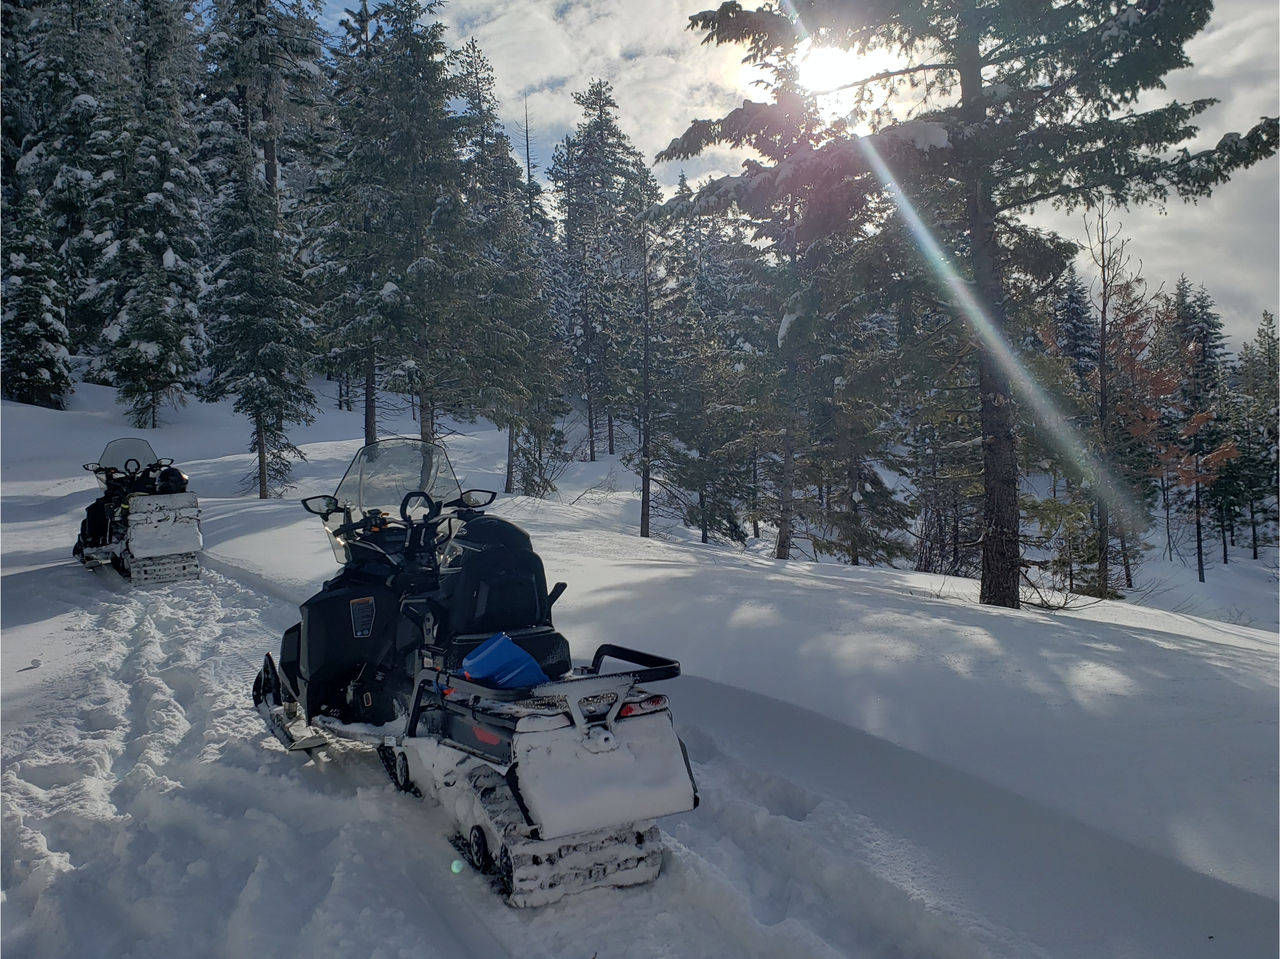 Enjoy privately guided Ski-Doo riding in Cambridge, ID